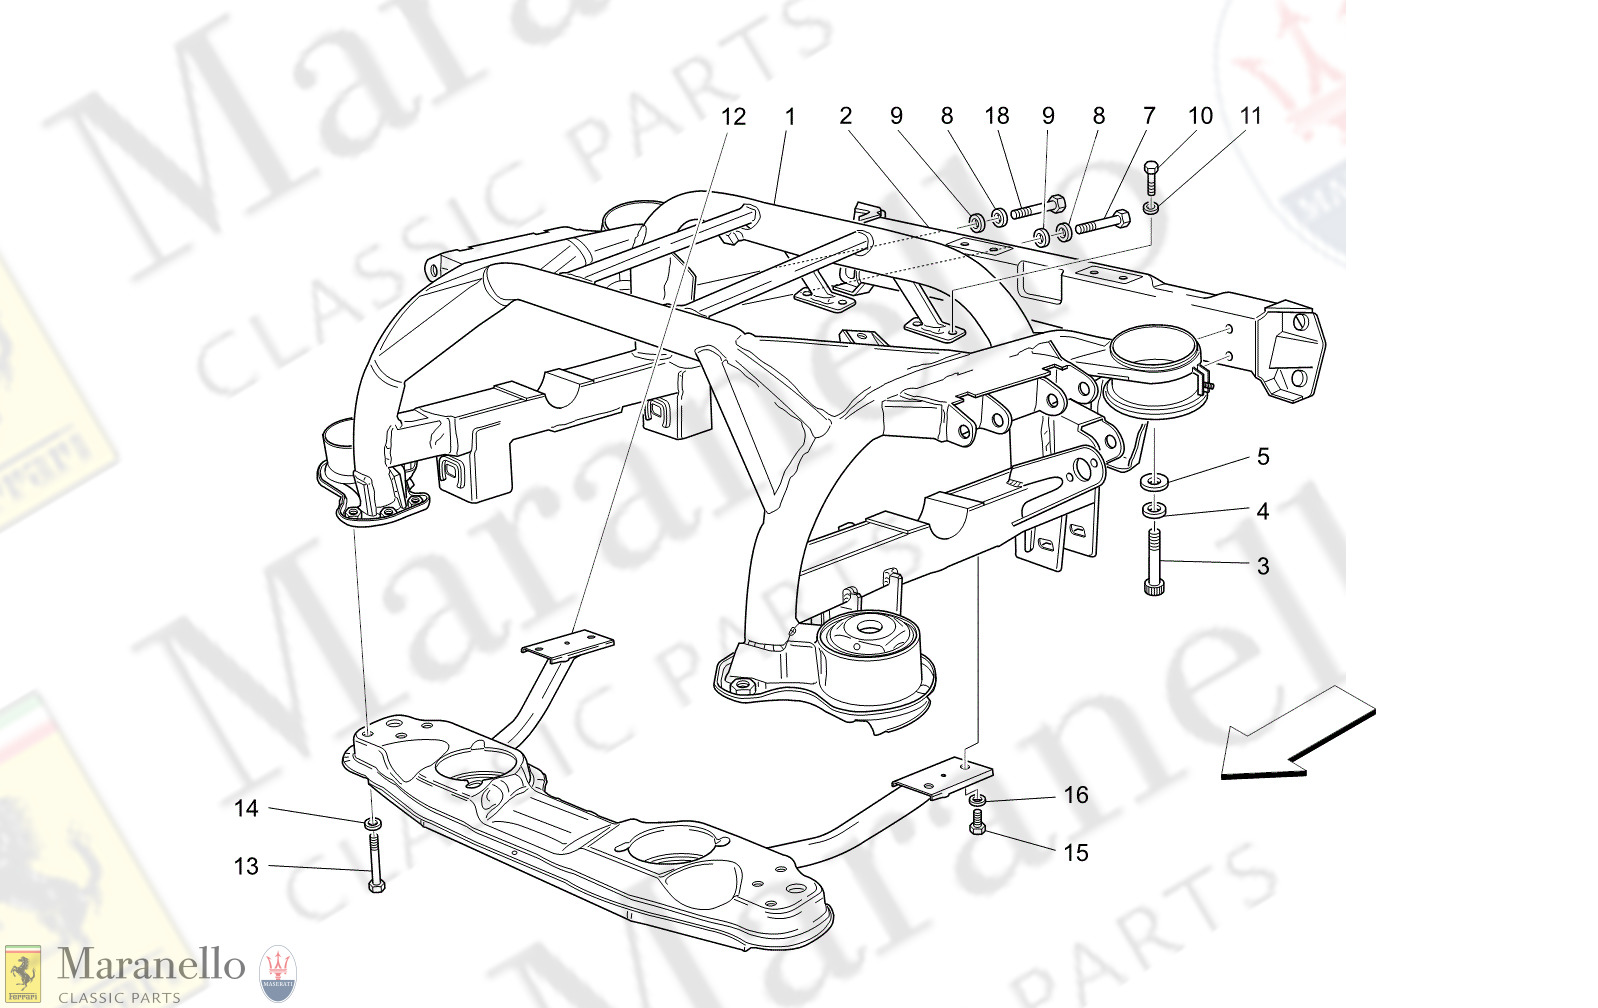 06.22 - 12 - 0622 - 12 Rear Chassis parts diagram for Maserati ...